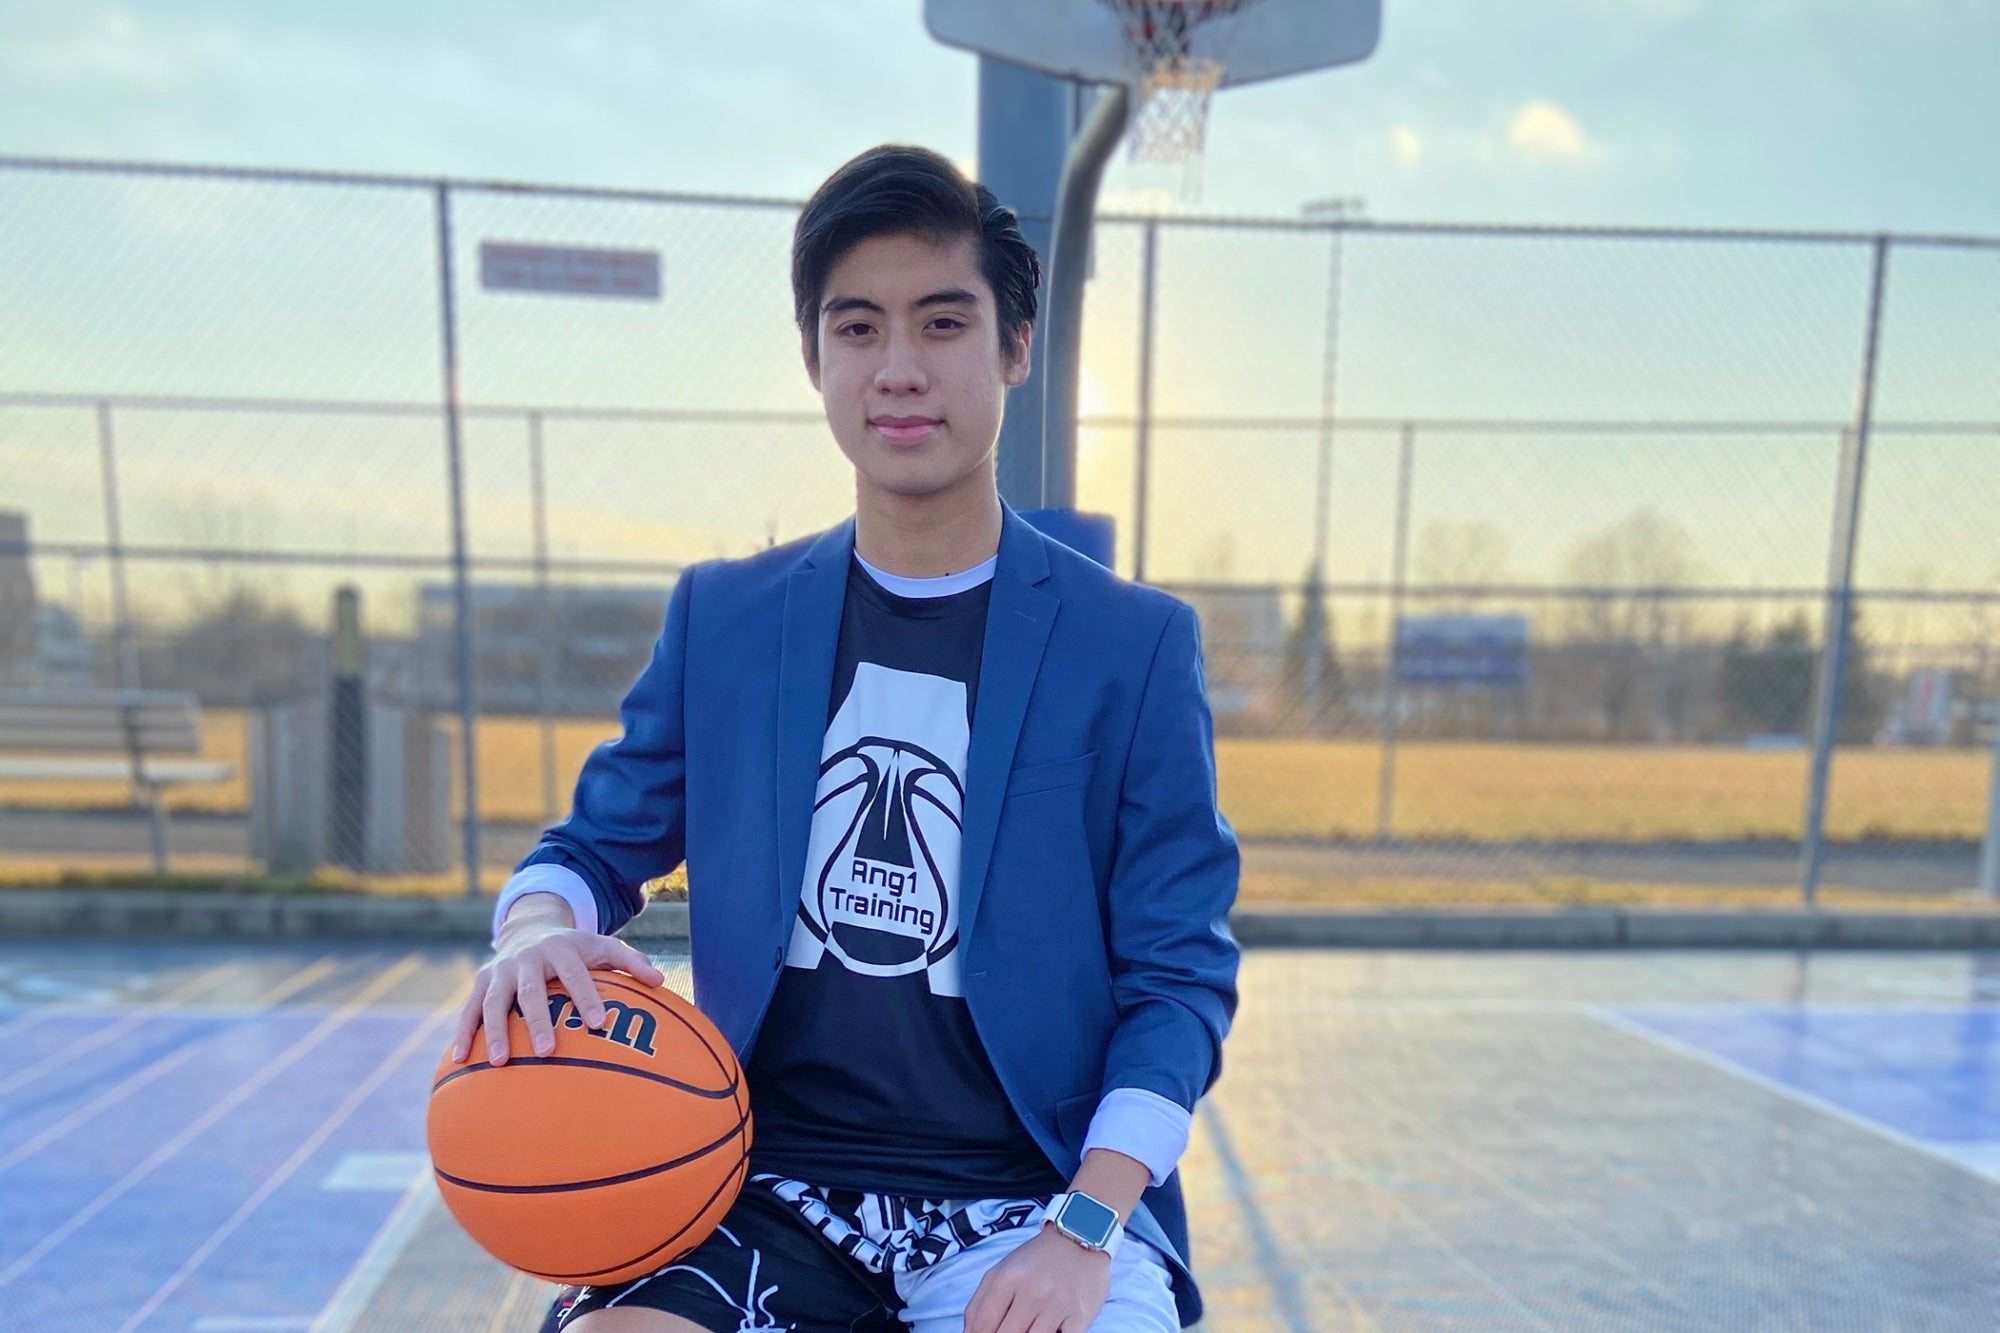 Teen Basketball Trainer Ryan Ang Has Some Tips for Other Young Entrepreneurs